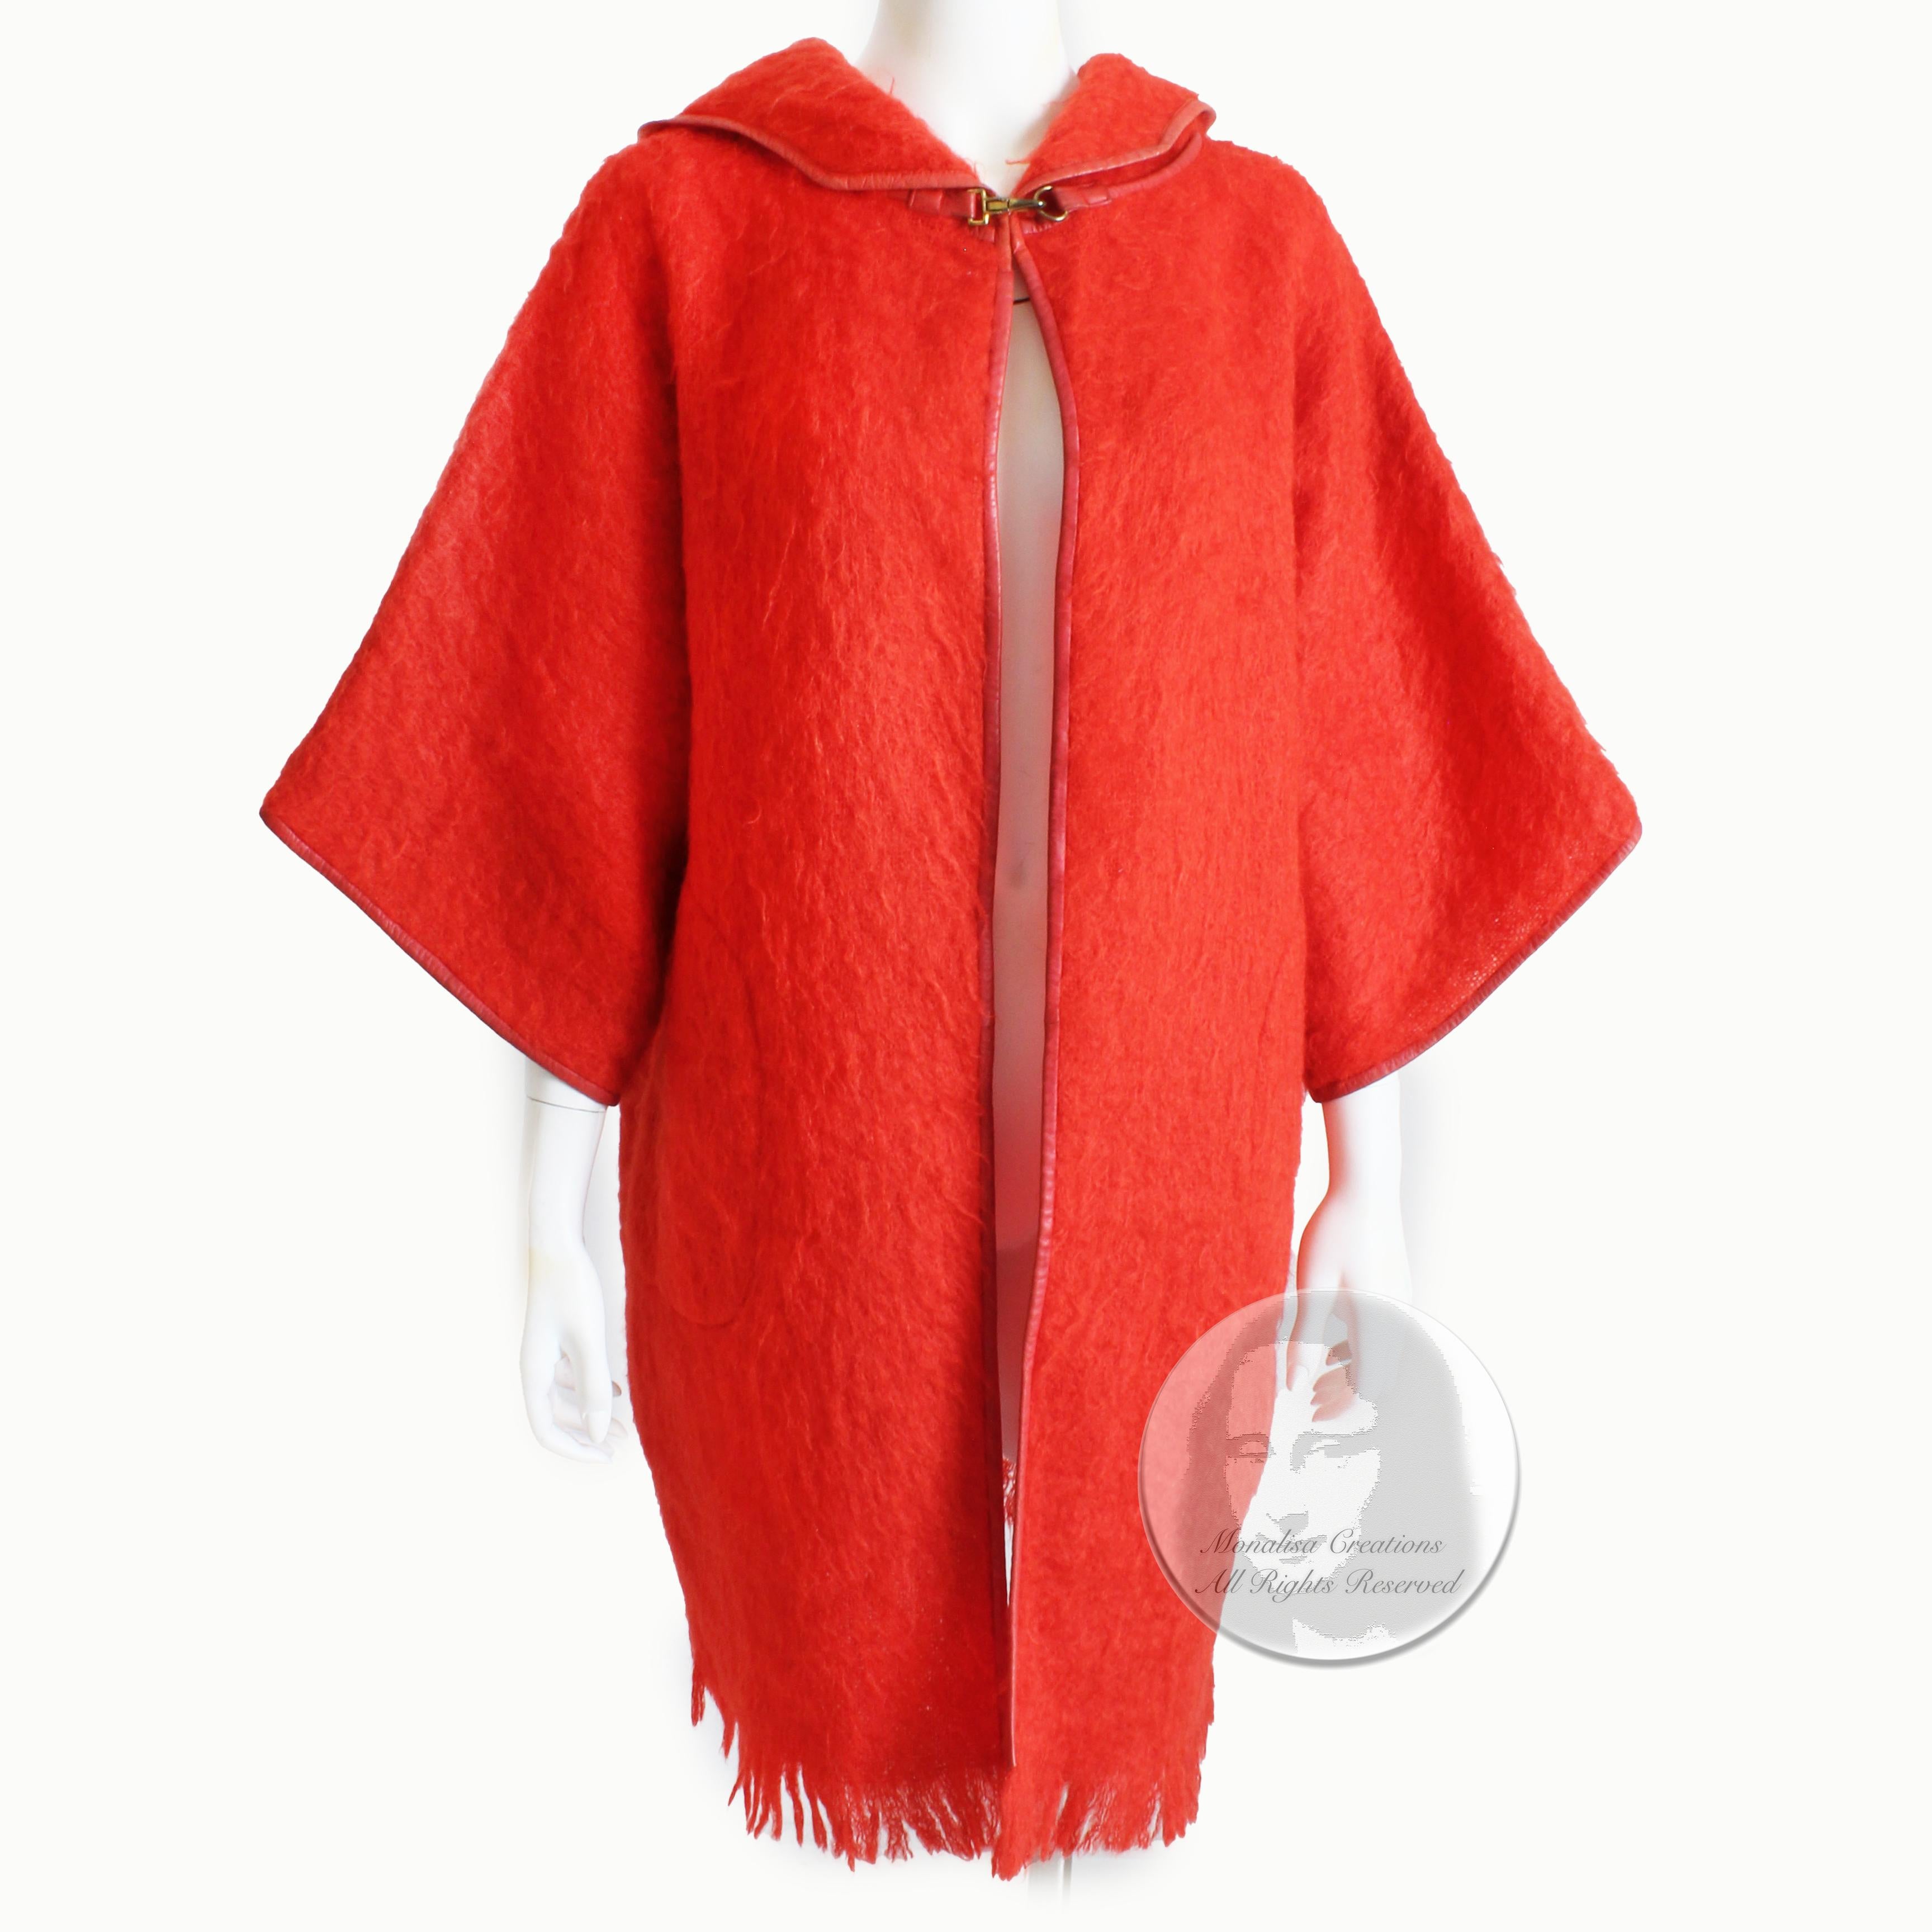 Preowned, vintage Bonnie Cashin for Sills mohair wool coat with hood, likely made in the 1960s.  Made from a brilliant coral-hued mohair wool, it features an attached hood, Kimono-style sleeves and half moon pockets at each hip.  It's trimmed in red